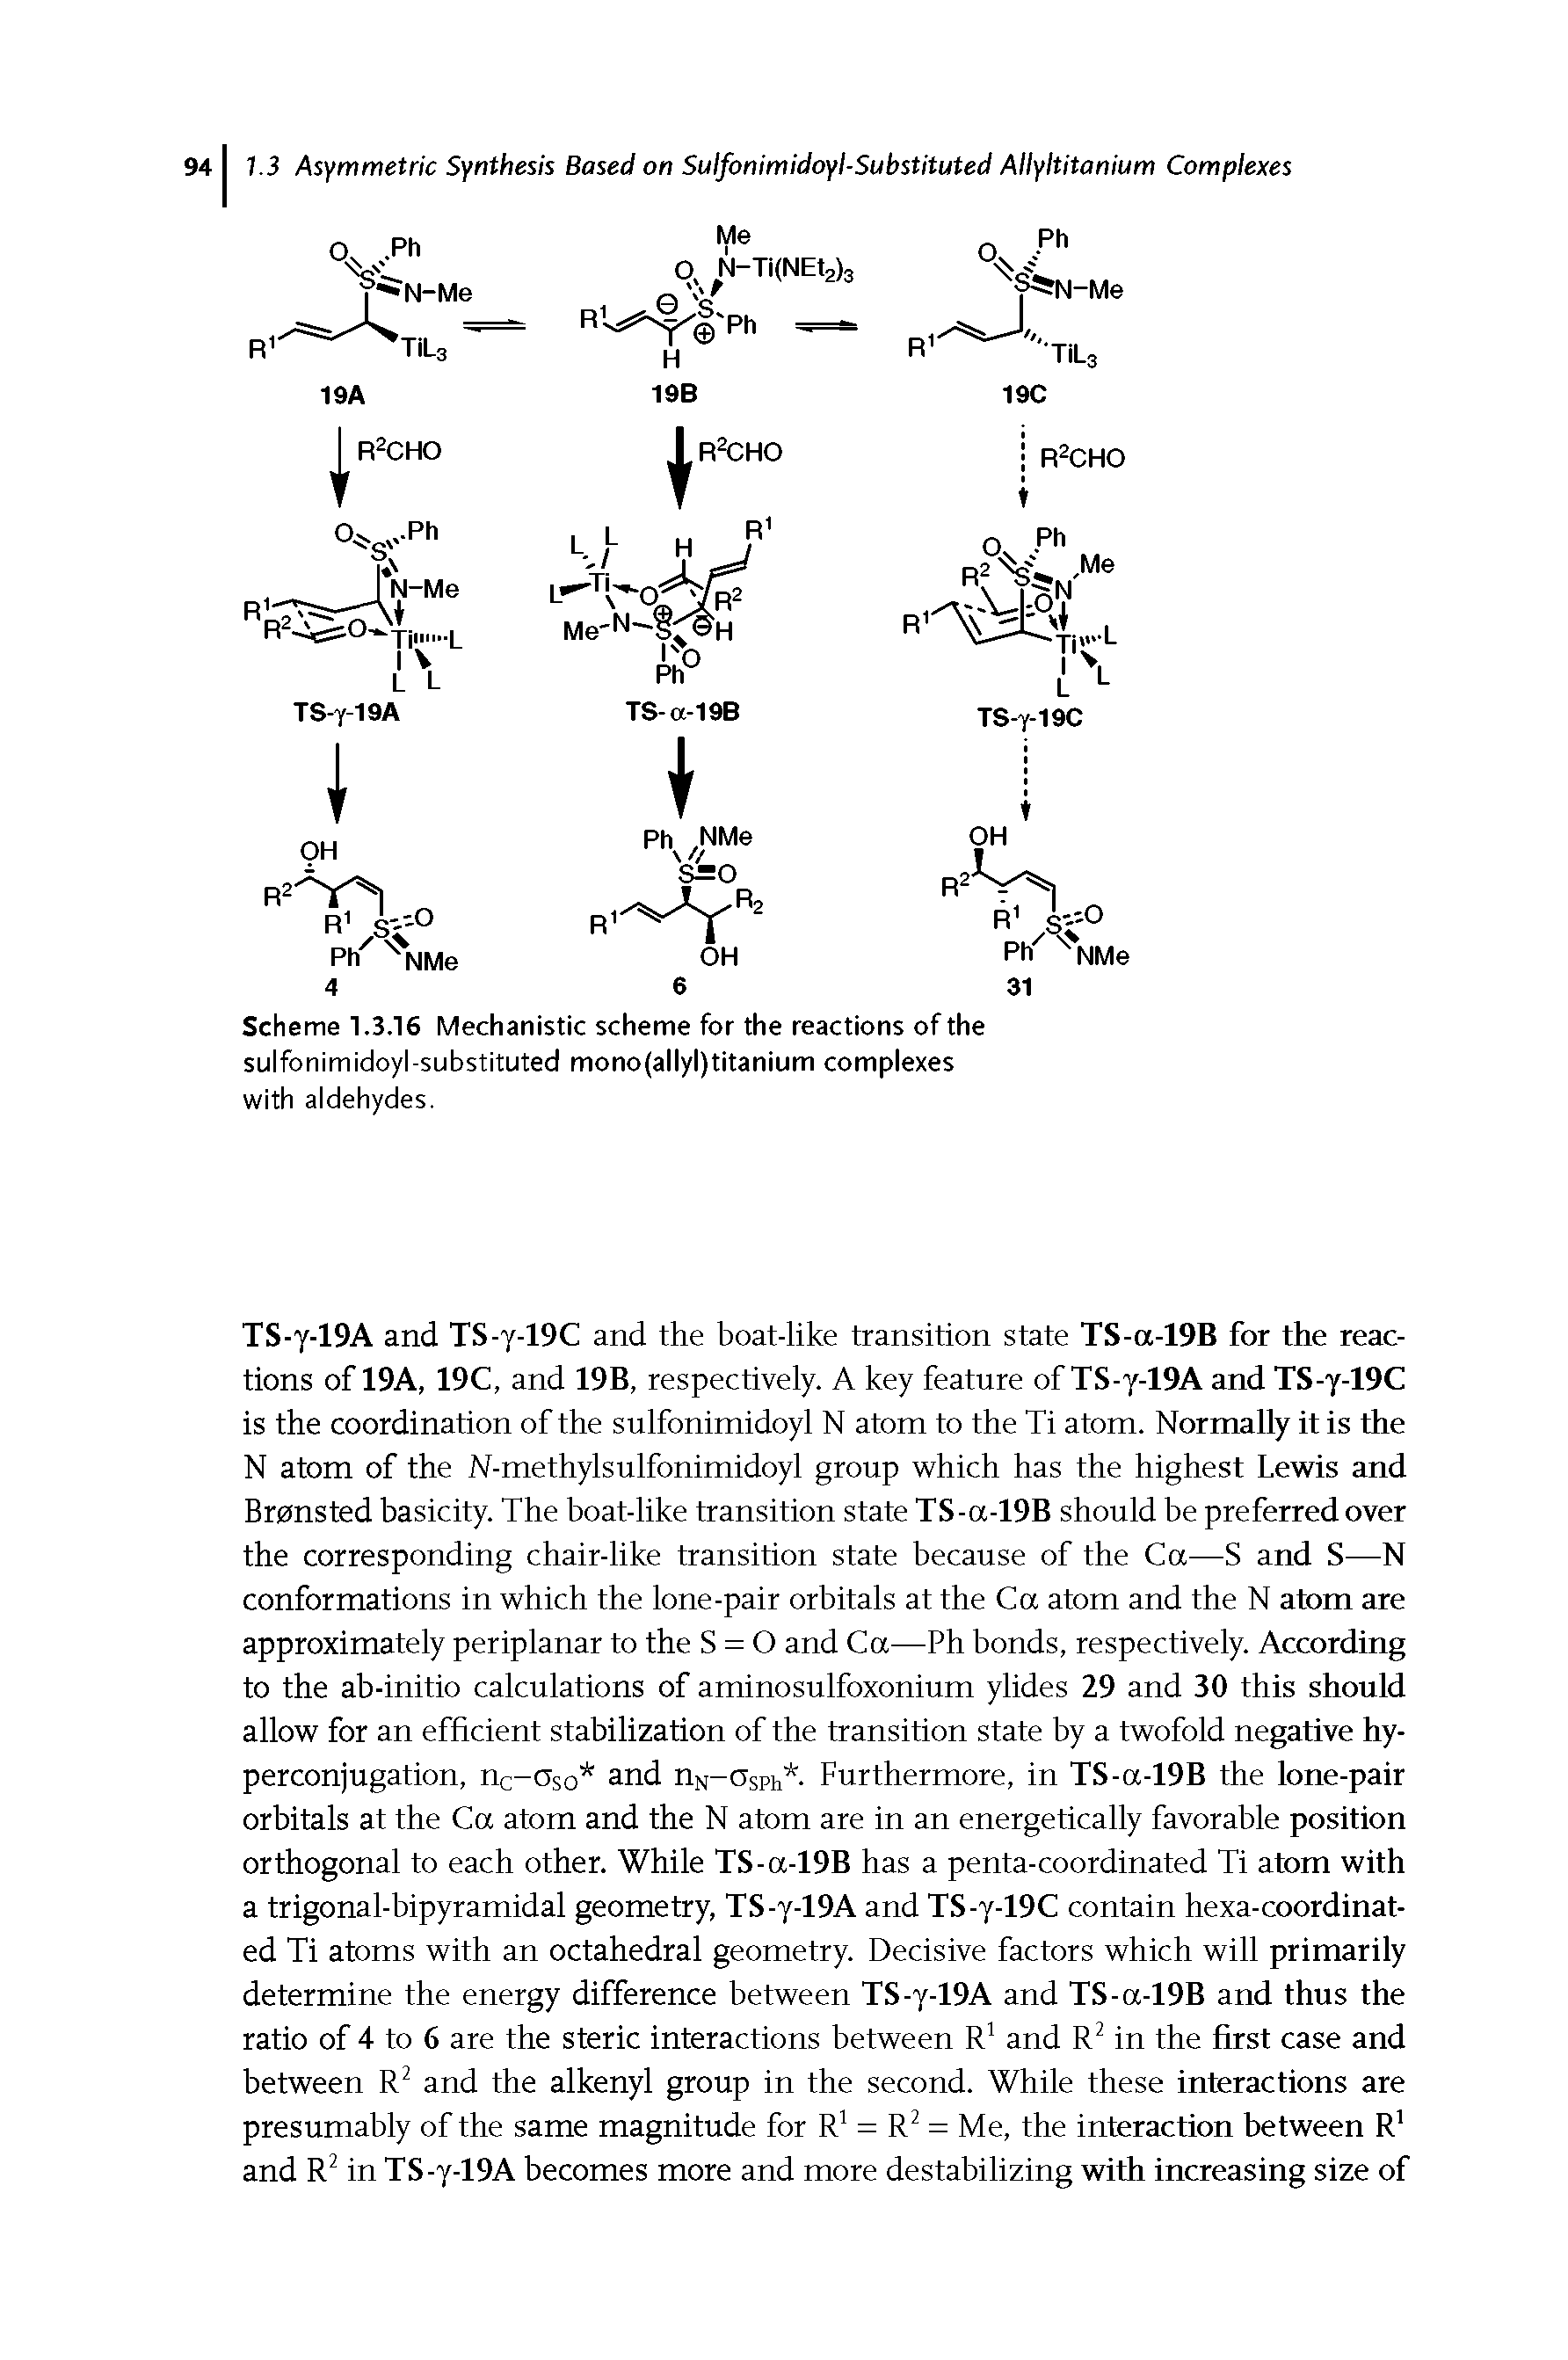 Scheme 1.3.16 Mechanistic scheme for the reactions of the sulfonimidoyl-substituted mono(allyl)titanium complexes with aldehydes.